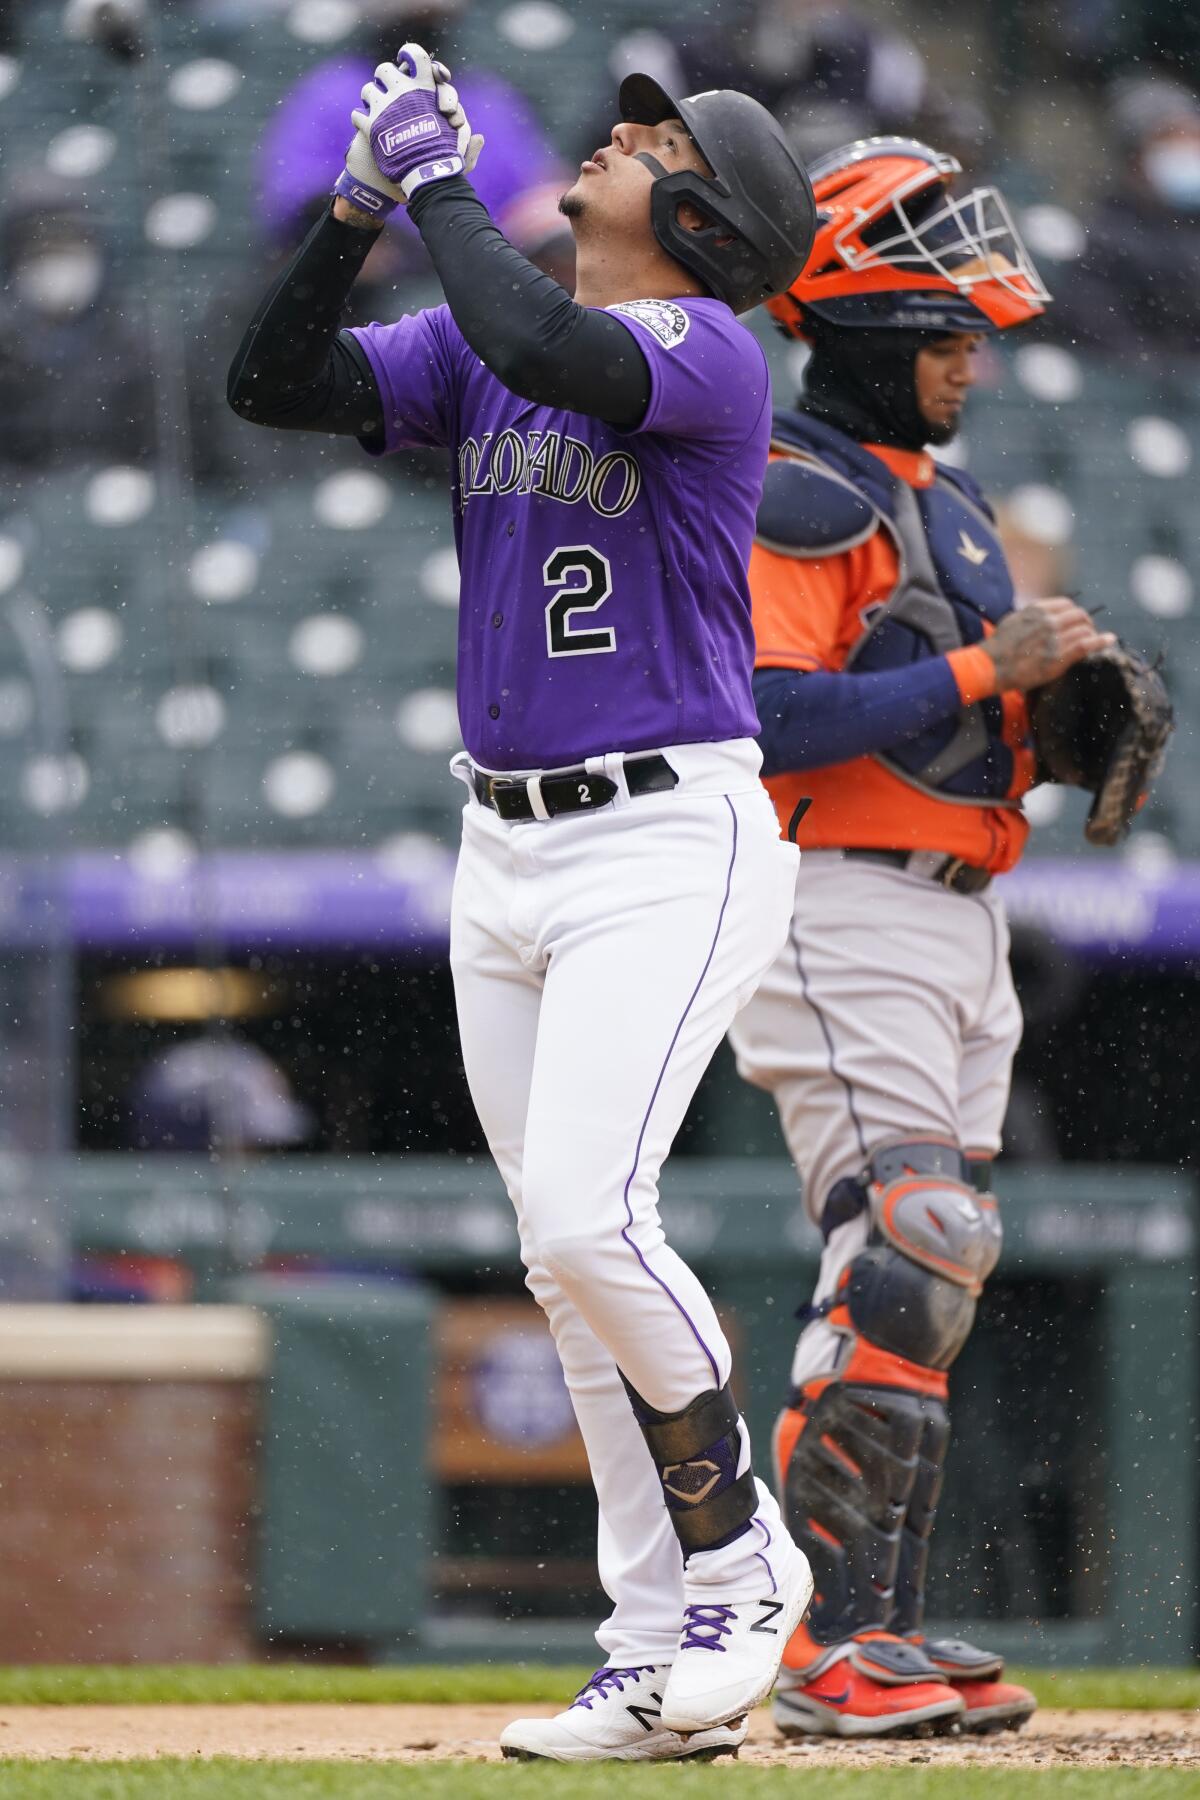 Wanted to make a Colorado Rockies alternate that was based on the